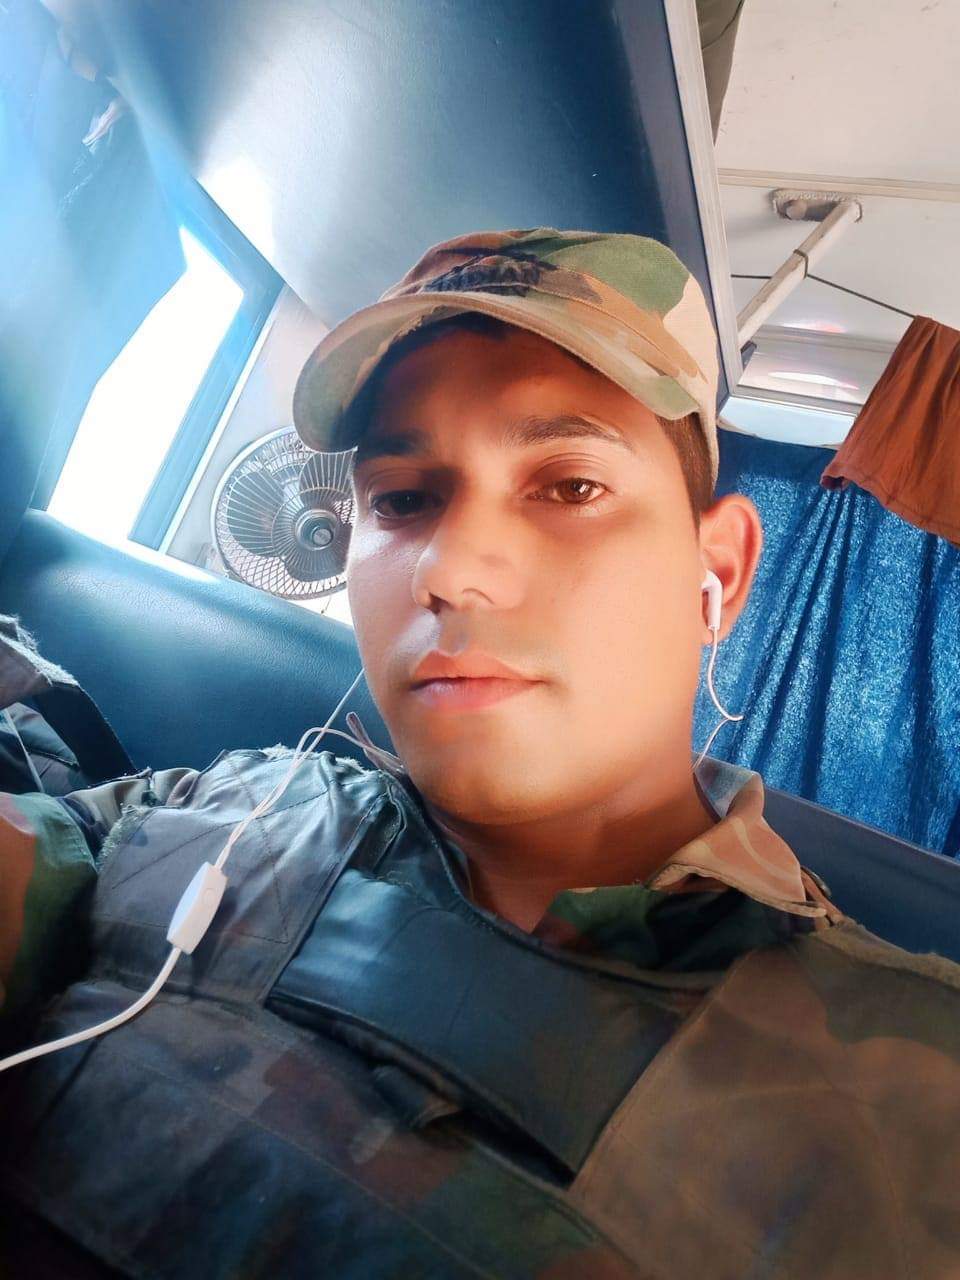 Odia Jawan Ajit Sahu Martyred A Day After Attack On Army Patrol In Pulwama